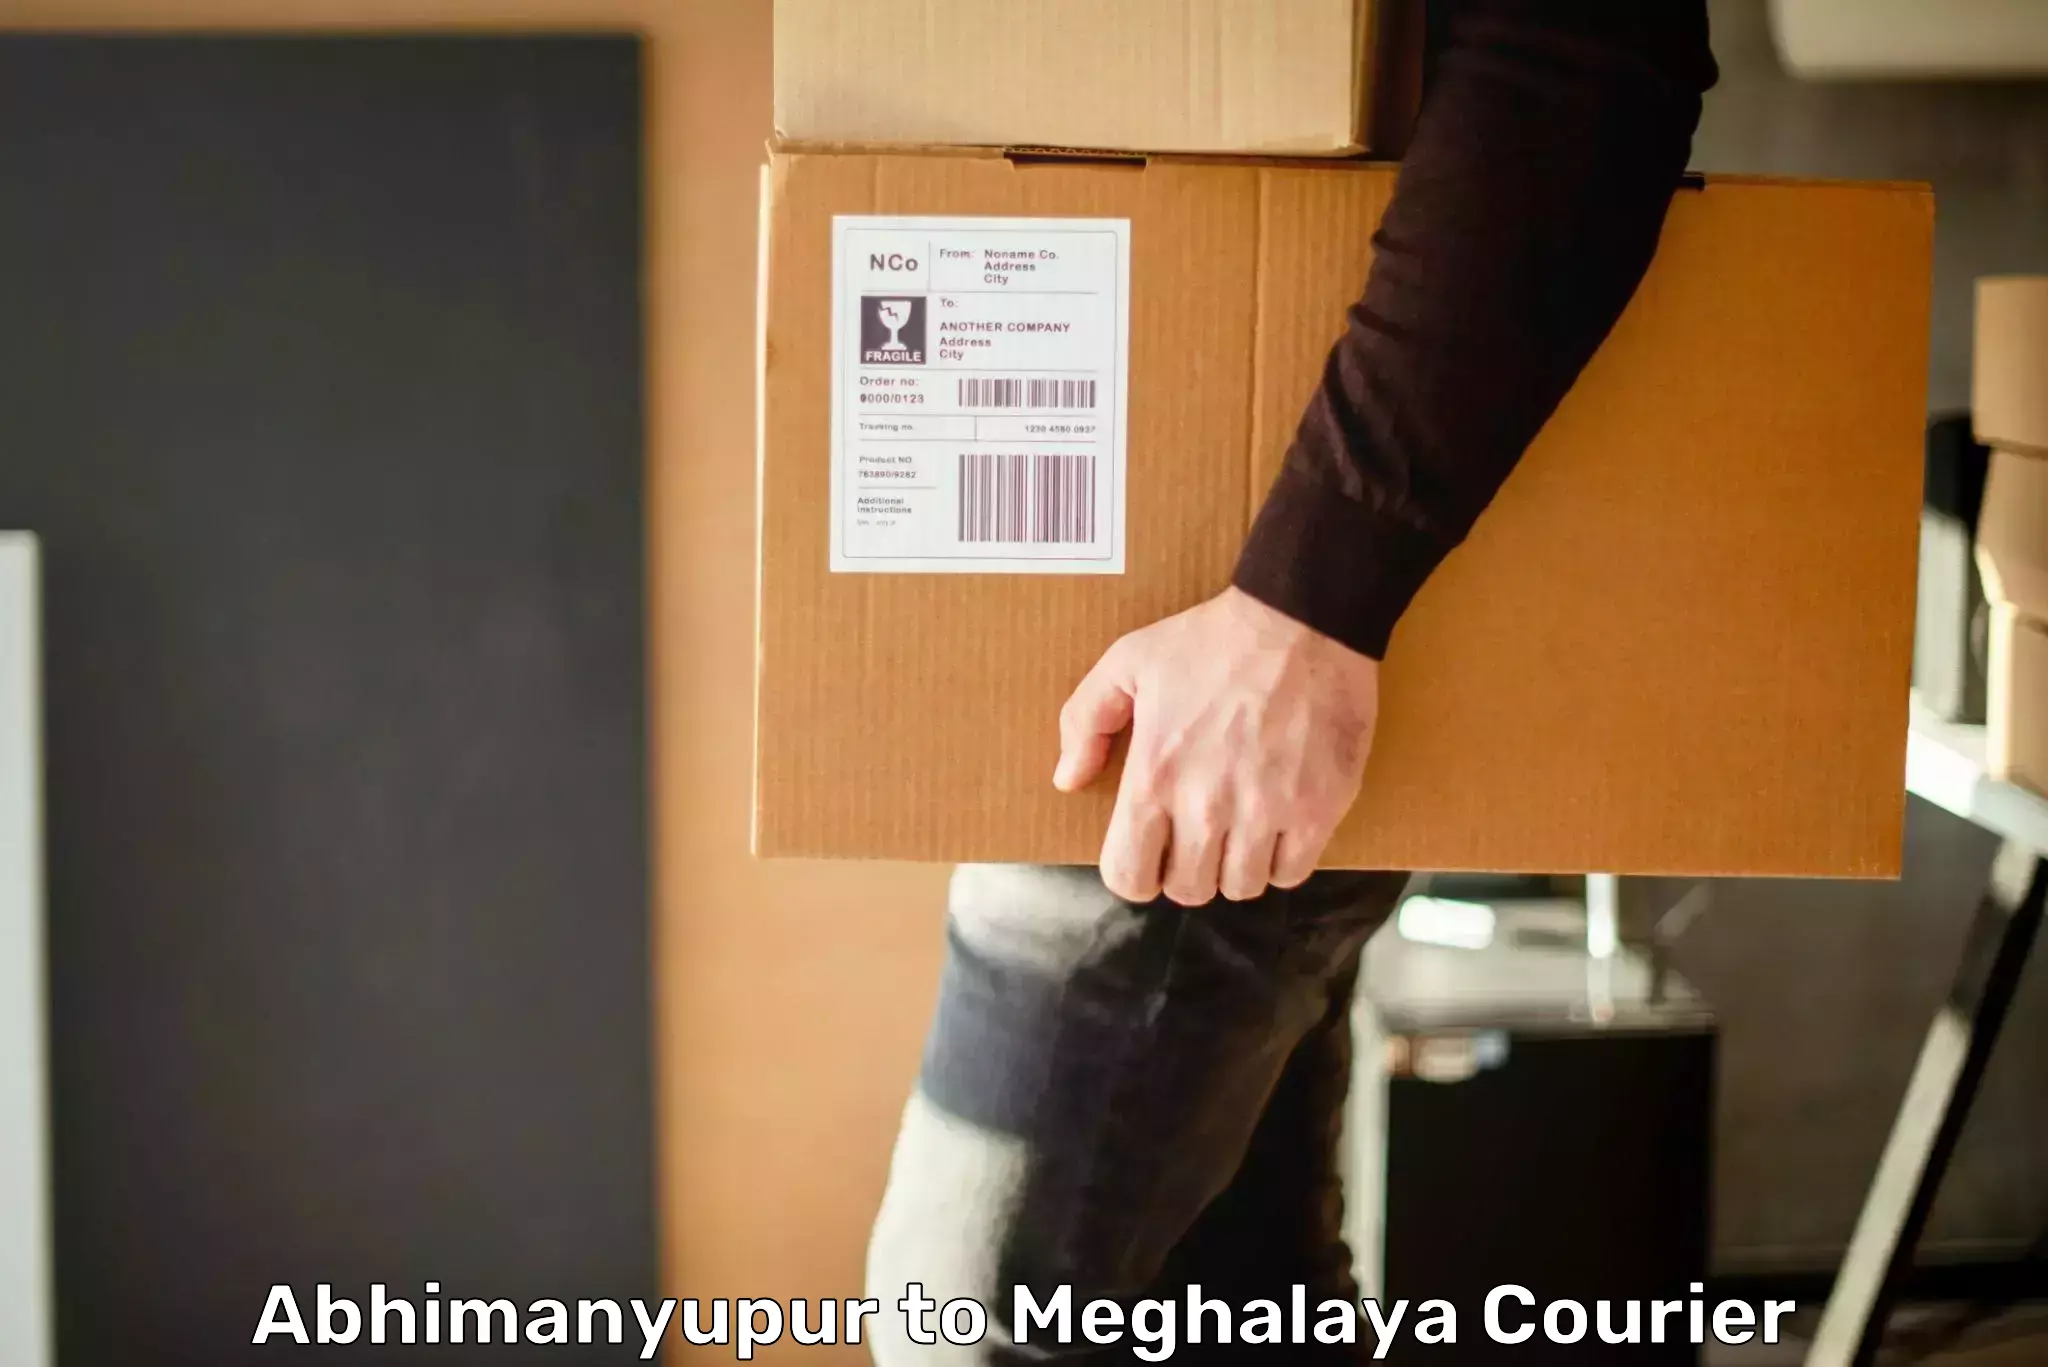 Nationwide parcel services Abhimanyupur to Meghalaya